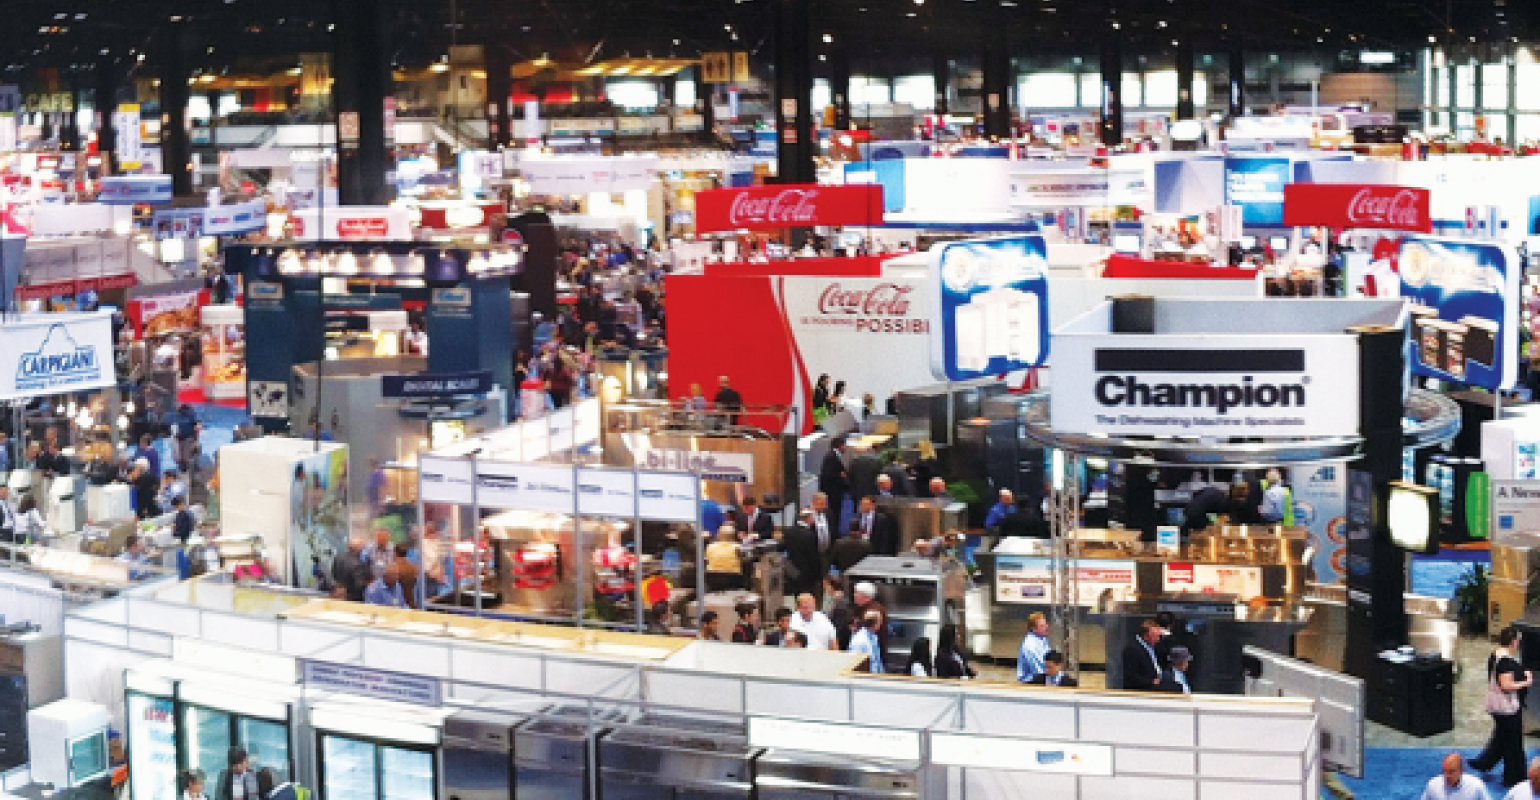 NRA Show kicks off with new education programs and exhibitors Nation